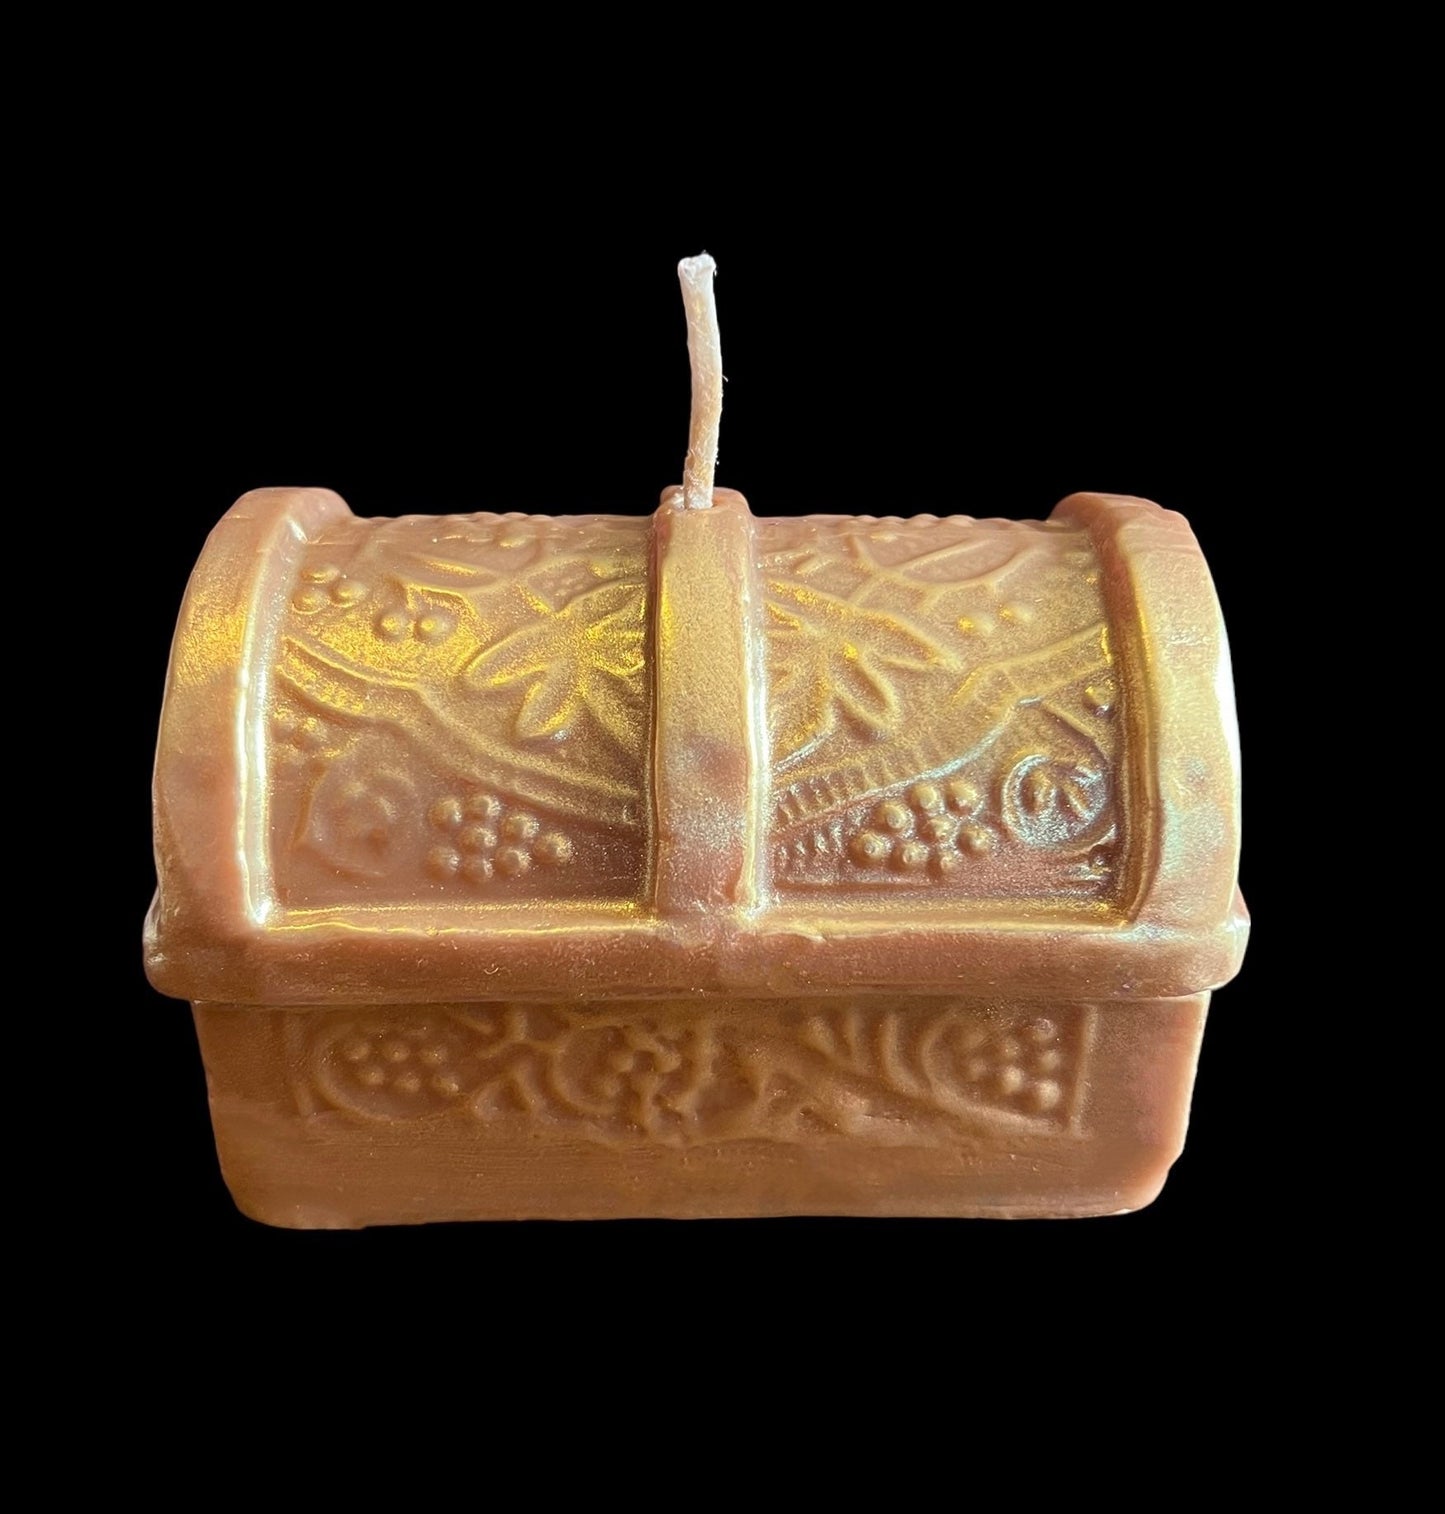 Treasure Chest Candle + Wishes + Prosperity